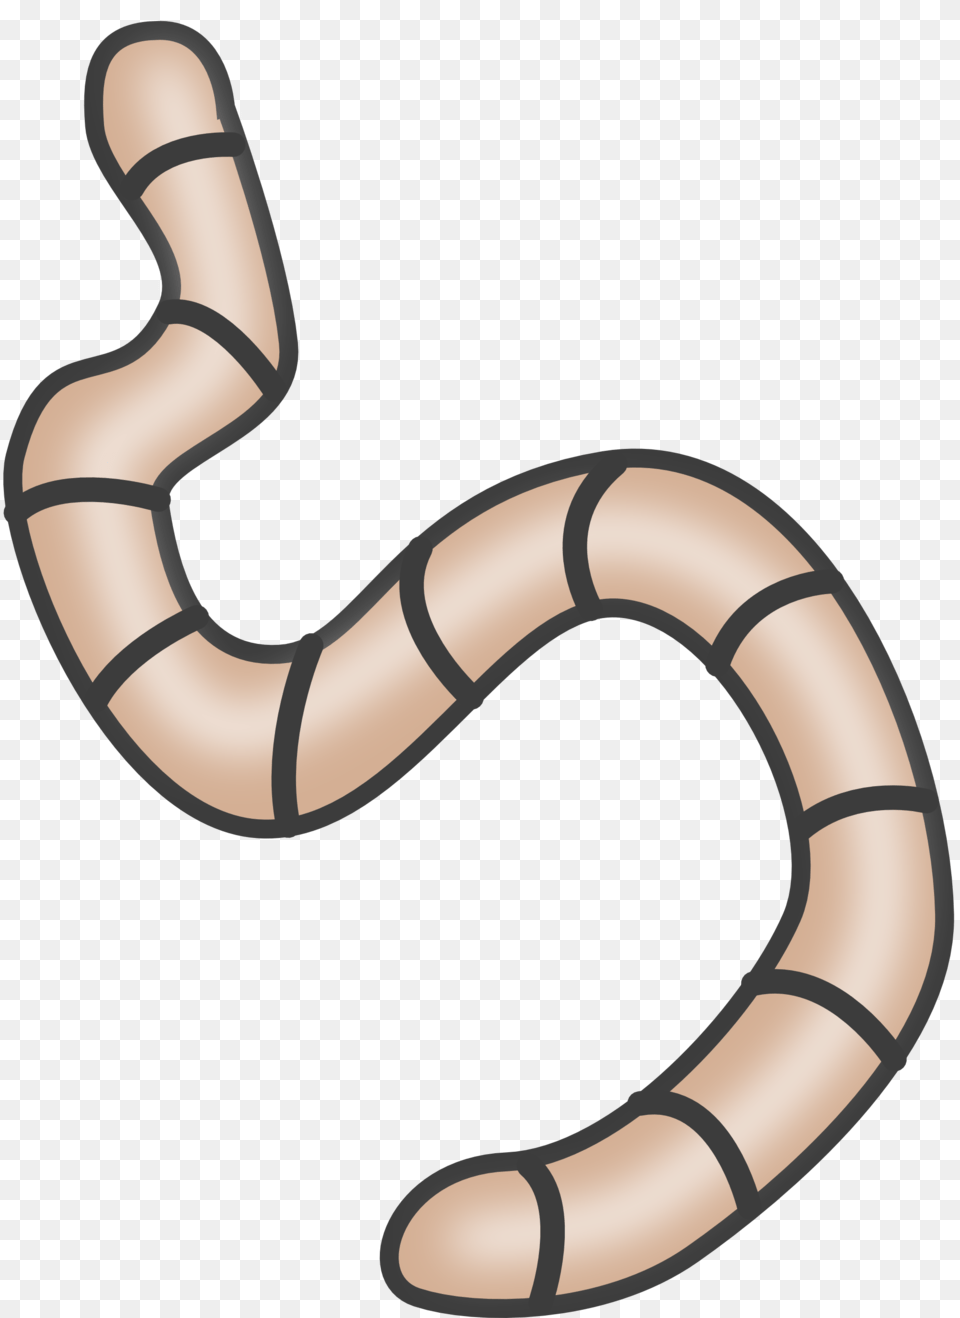 Earthworms Graphics, Animal, Smoke Pipe, Reptile Free Png Download